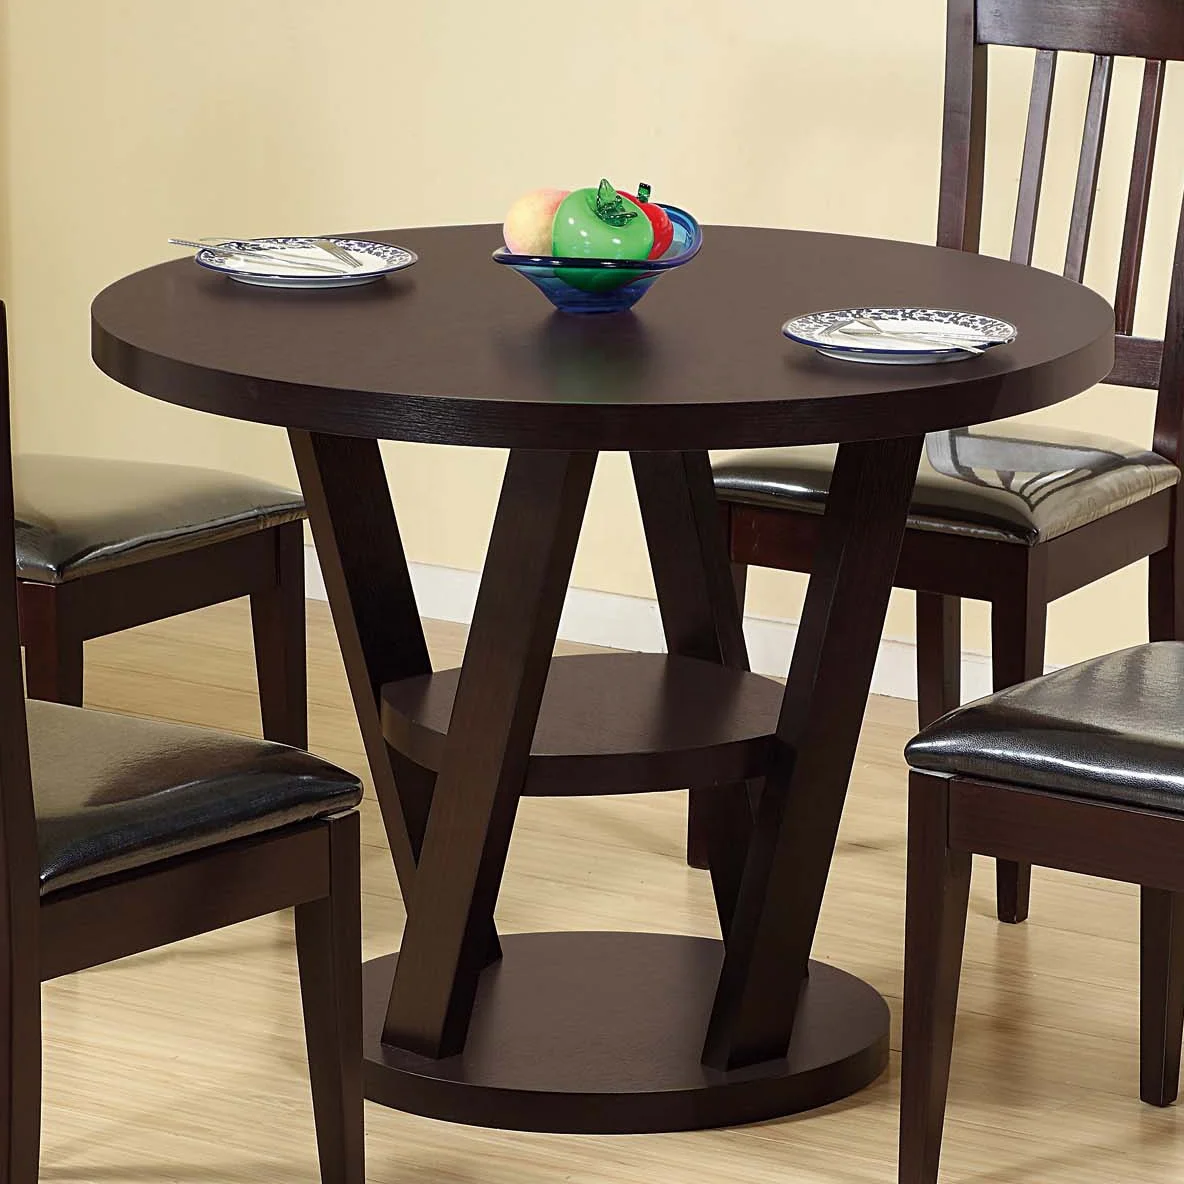 NOVA Modern Multifunctional Wooden Top Dining Table Round Normal Dining Room Table Sets Furniture With Upholstered Chair